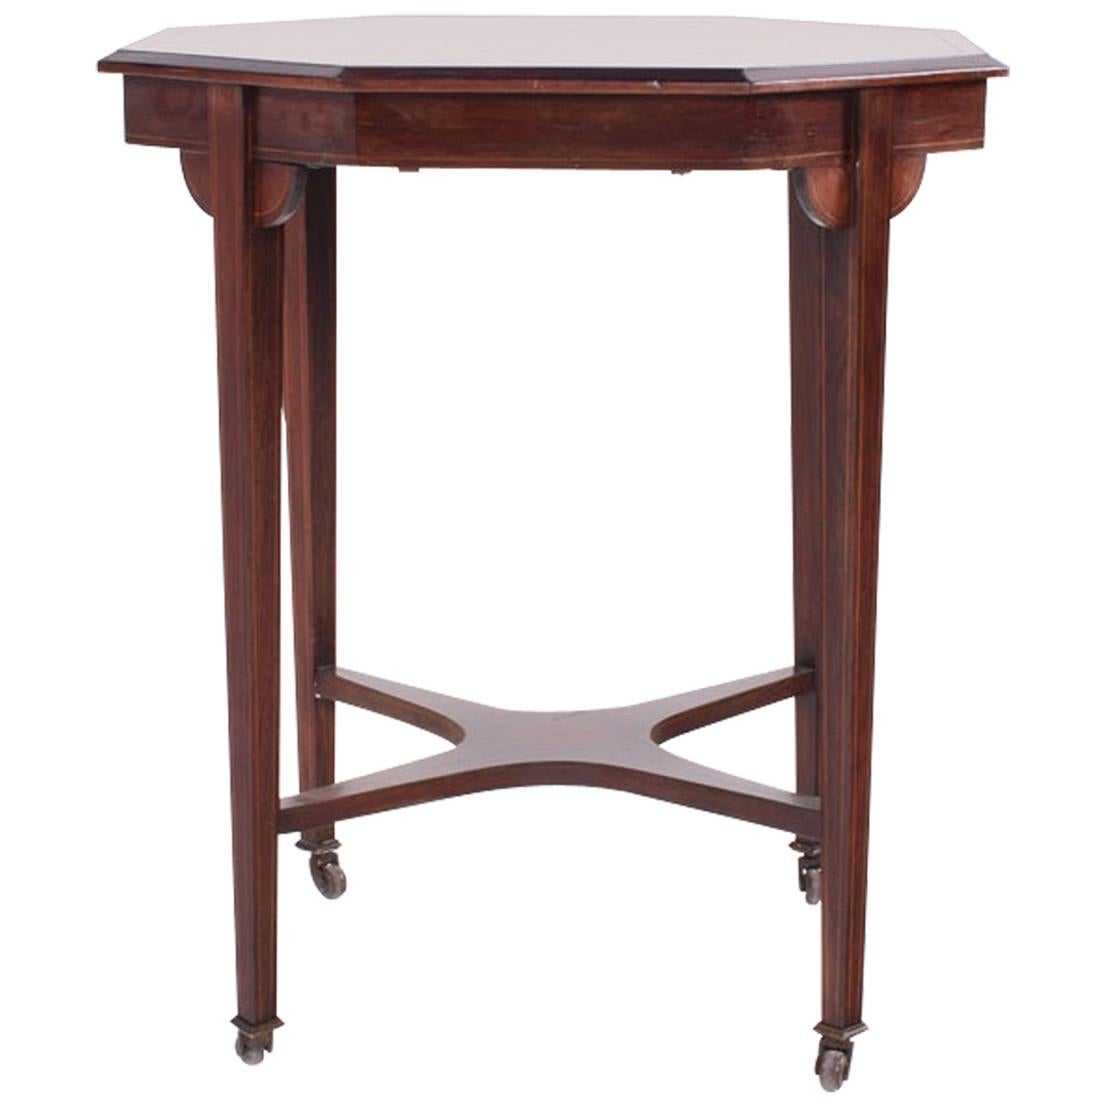 Victorian Rosewood Inlaid English Octagonal Tea Table, 1890 For Sale